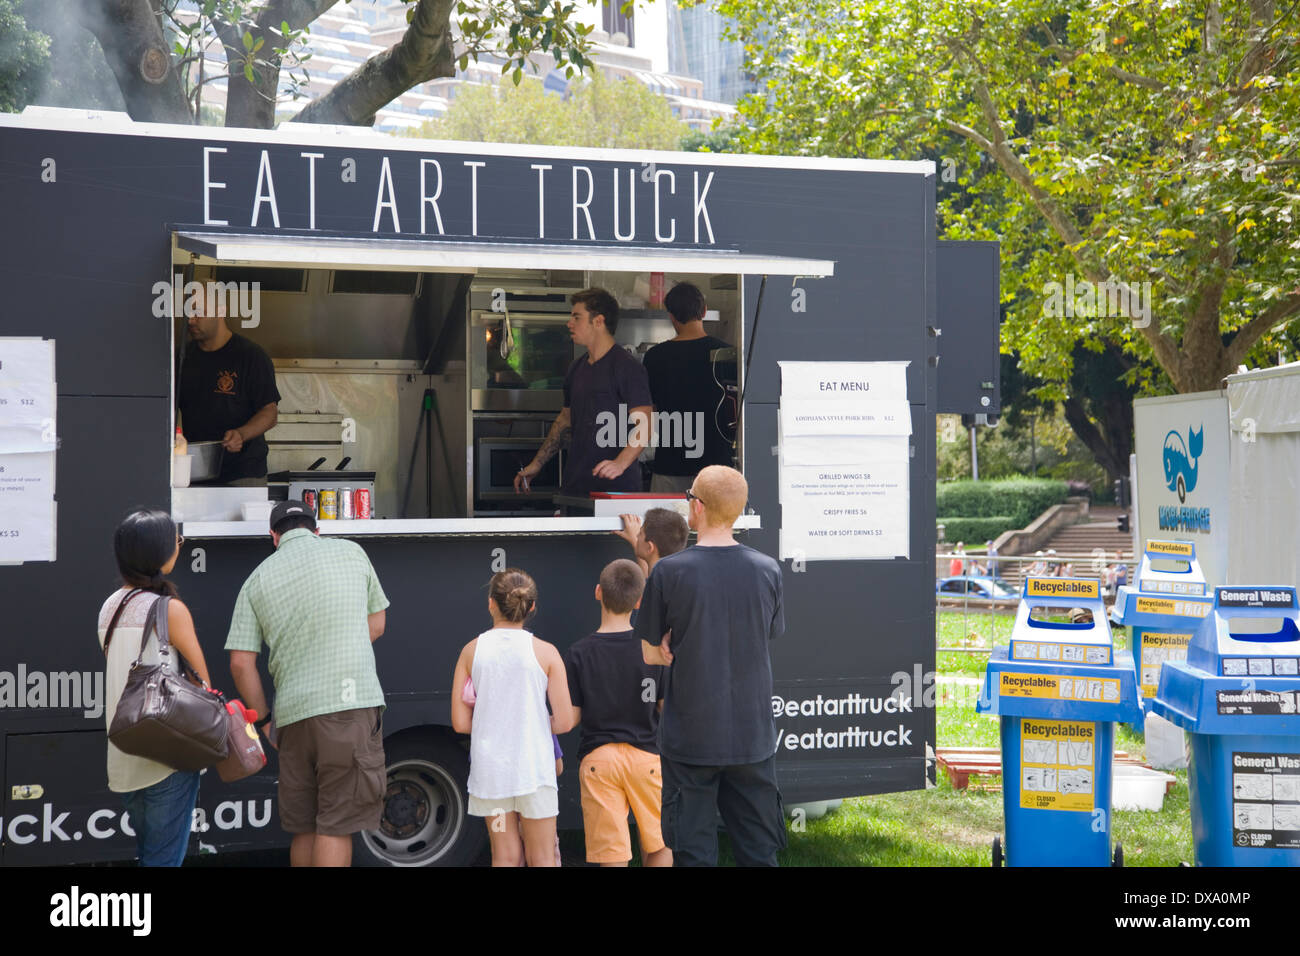 Food Truck In Park High Resolution Stock Photography and Images - Alamy